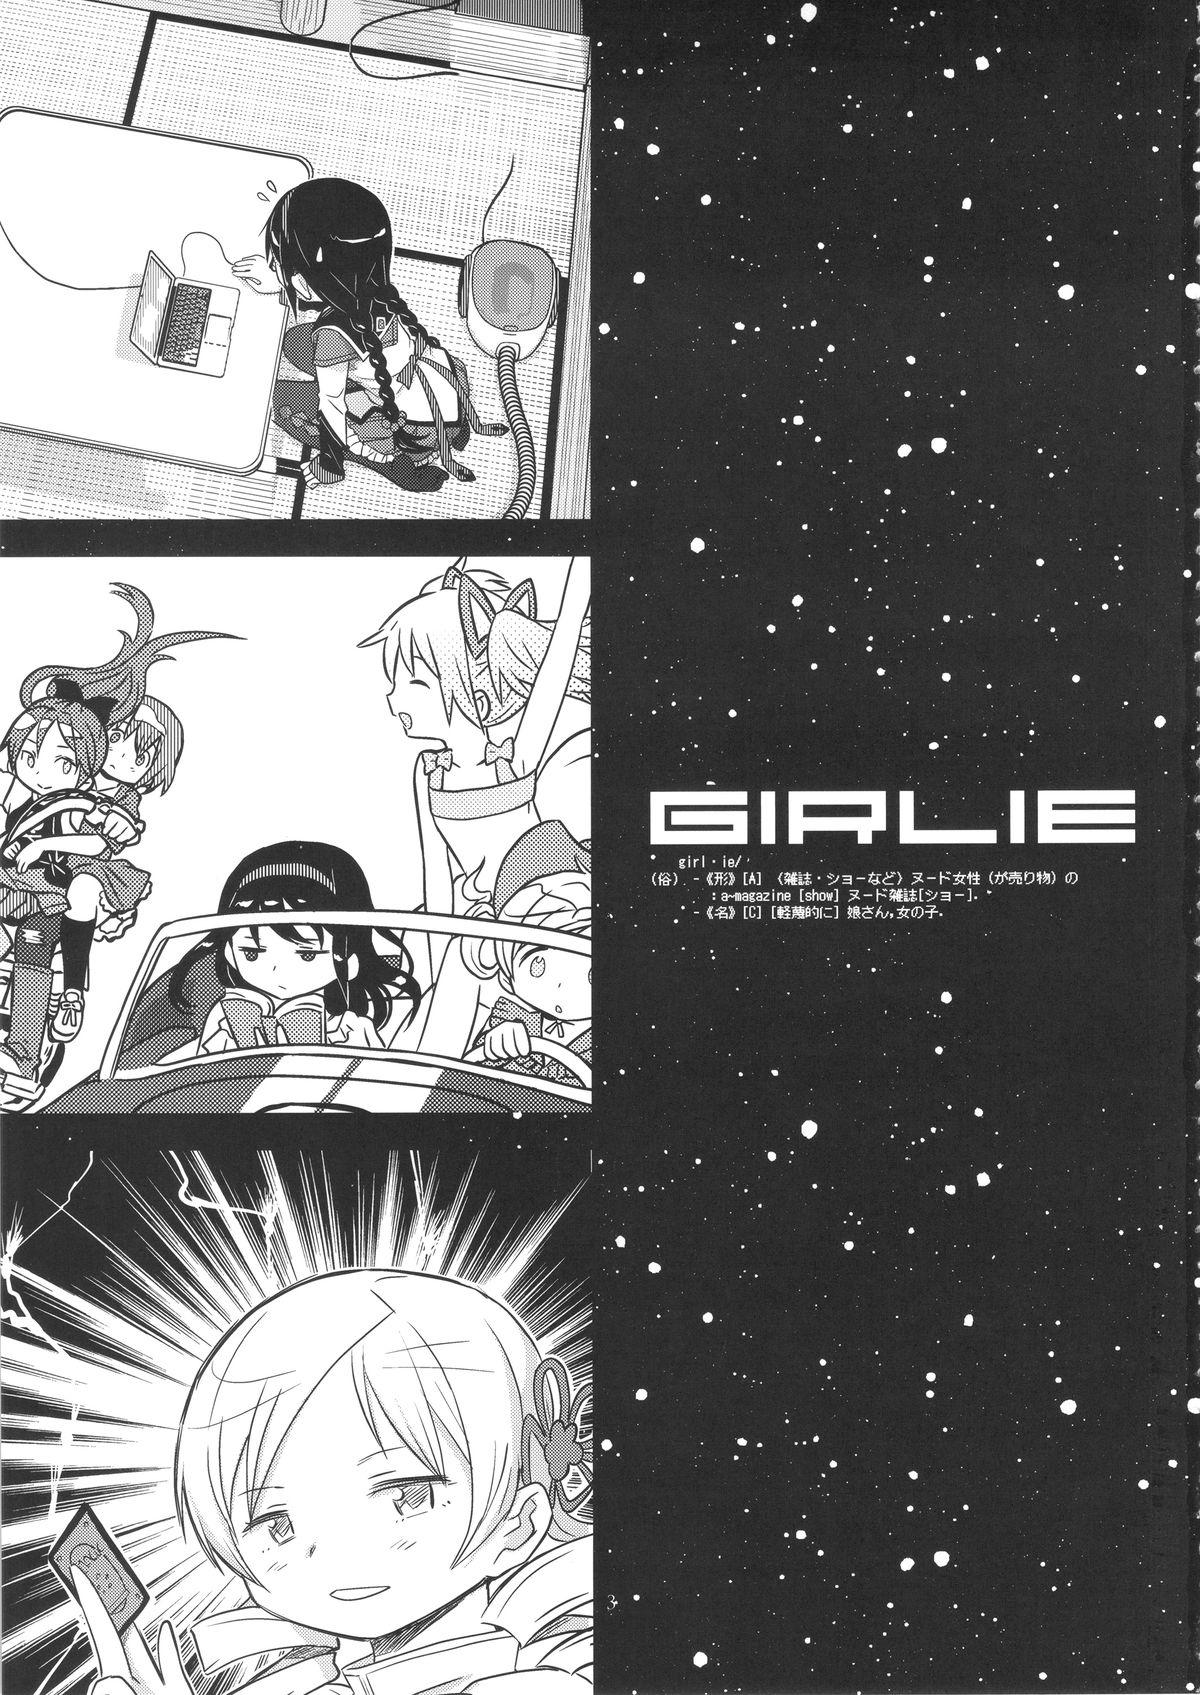 Pounded GIRLIE:EX02 - Puella magi madoka magica Lady - Page 3